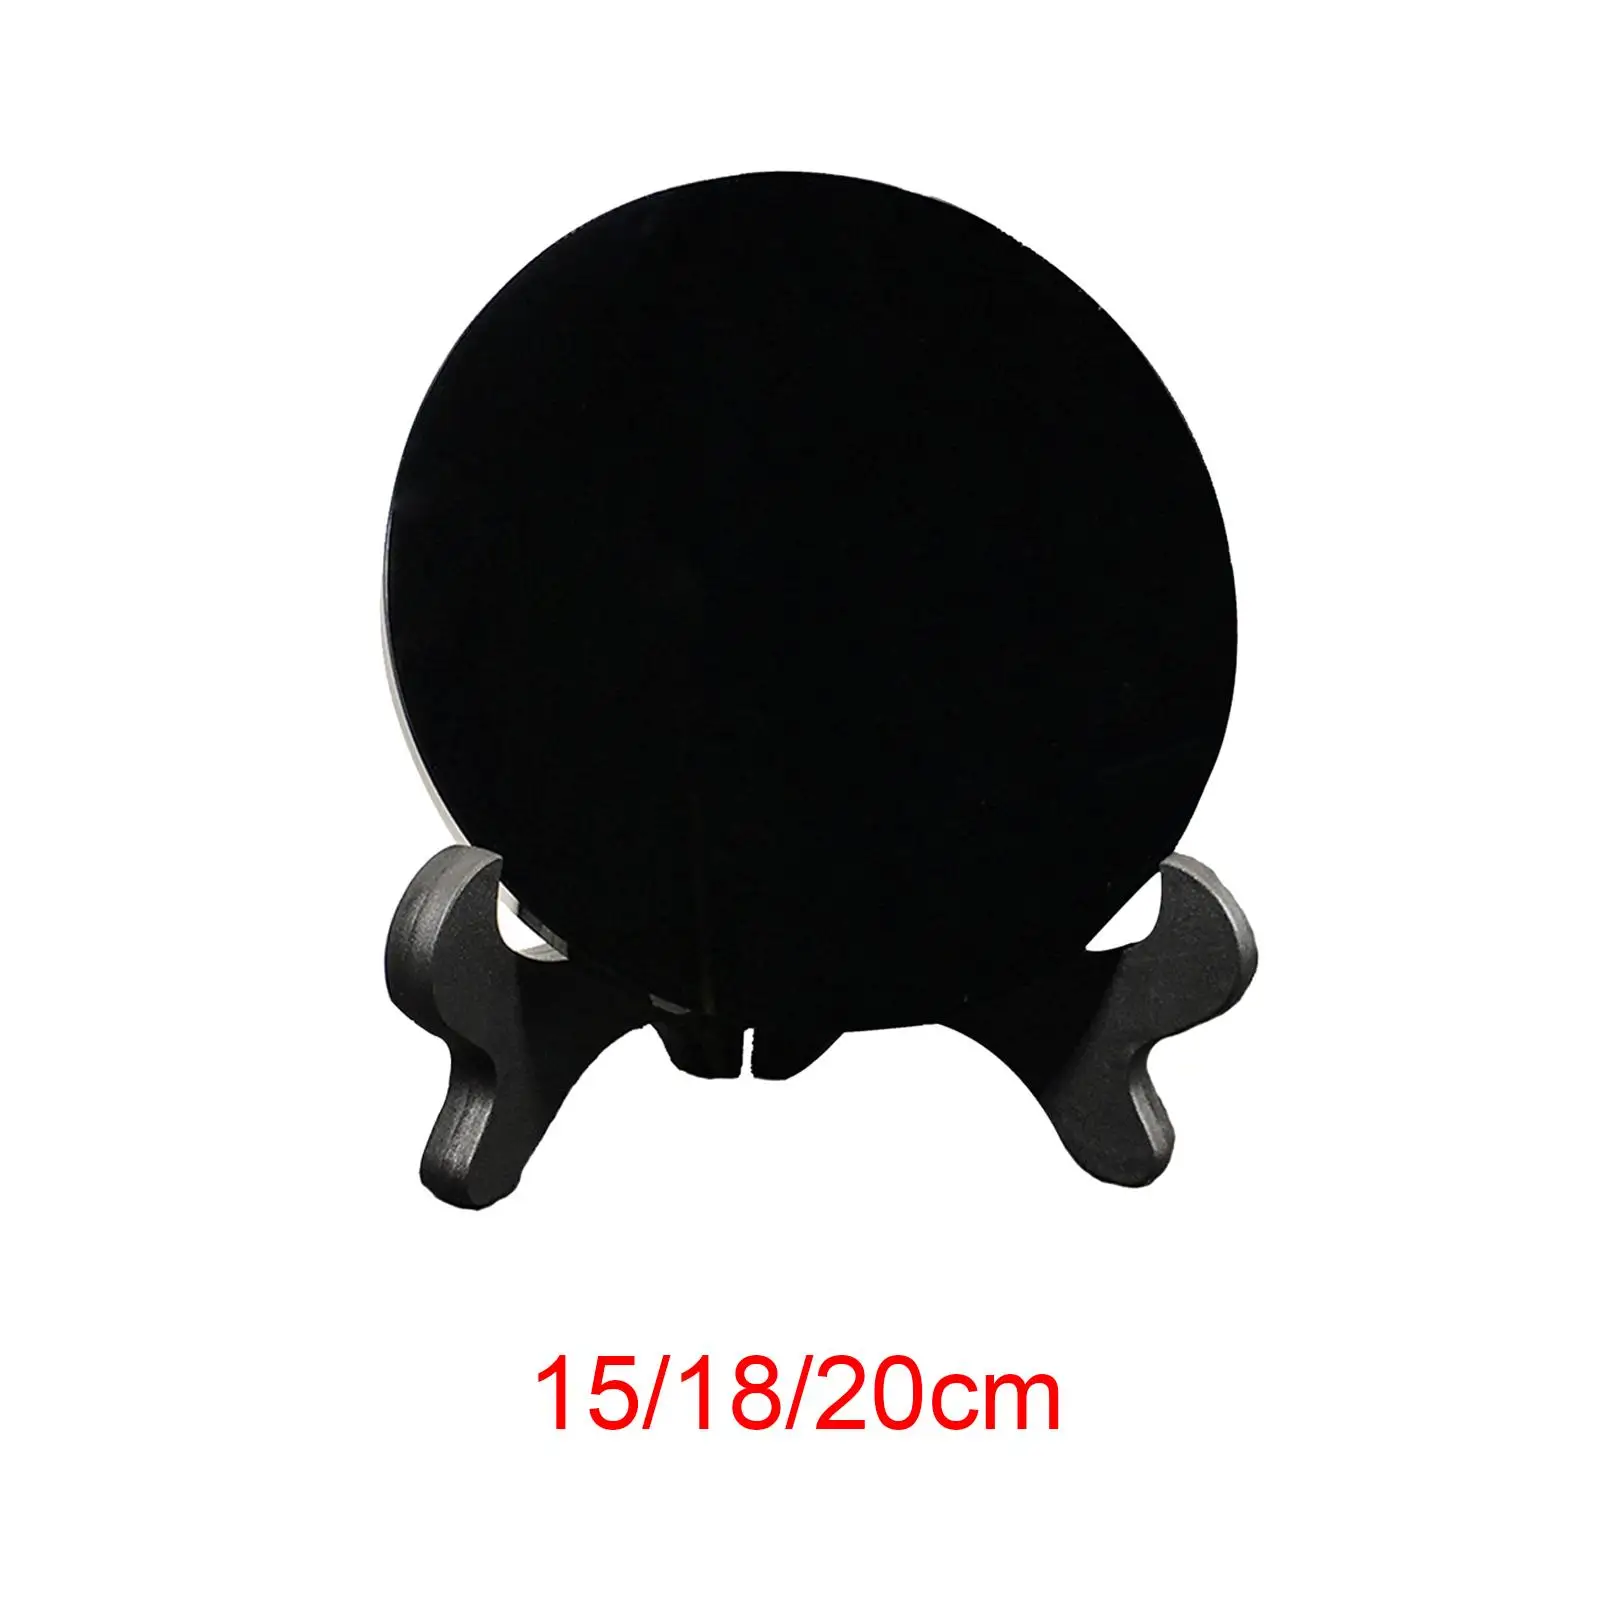 

Obsidian Stone Disc Round Plate Home Desk Decor Disk Meditation Augury Crafts Obsidian Pocket Scrying Mirror Feng Shui Mirror